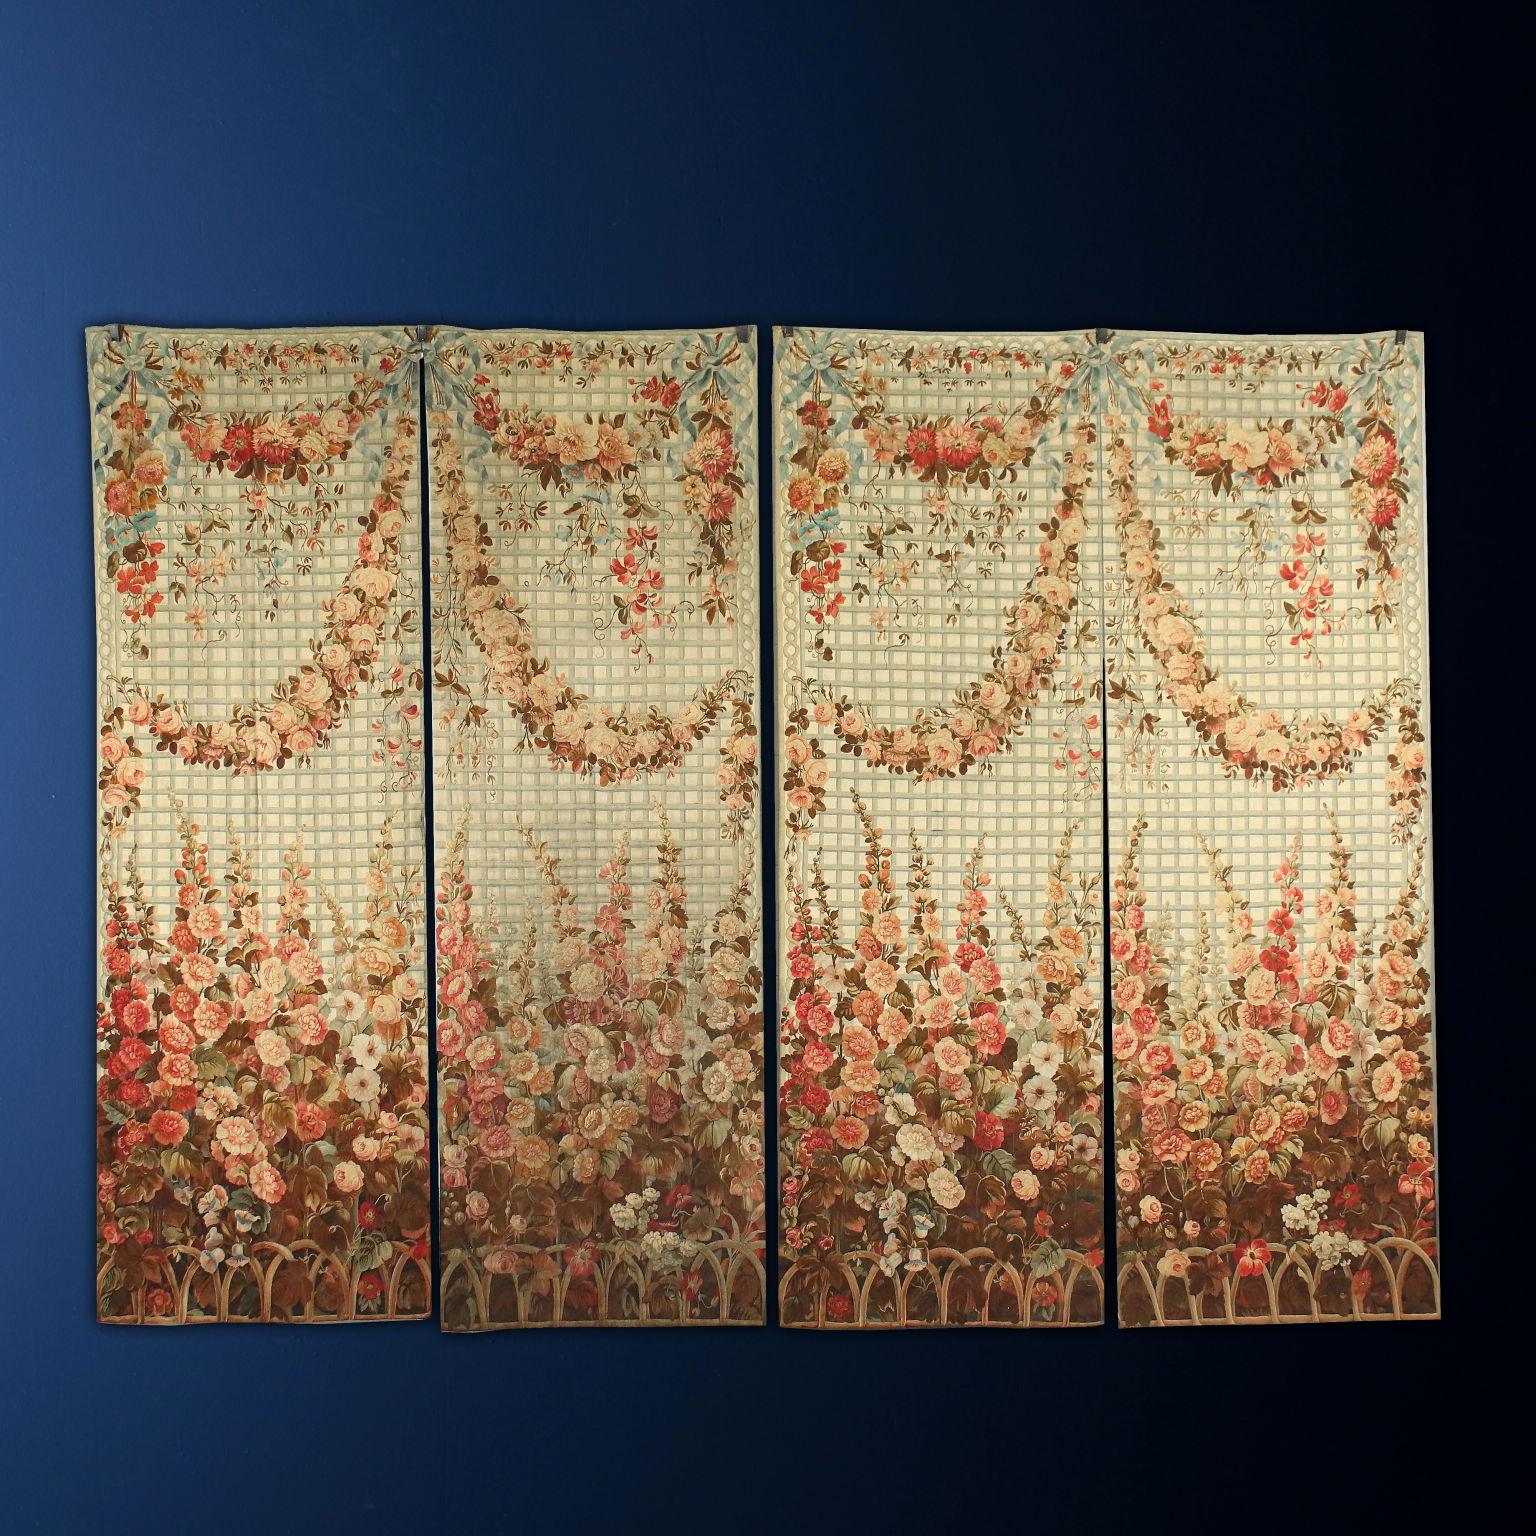 Group of four wool tapestries in which, on a light background, a pergola with floral borders and festoons is represented, characterized by a great variety of species always in light colors tending to pink and peach, held back by cerulean bows and